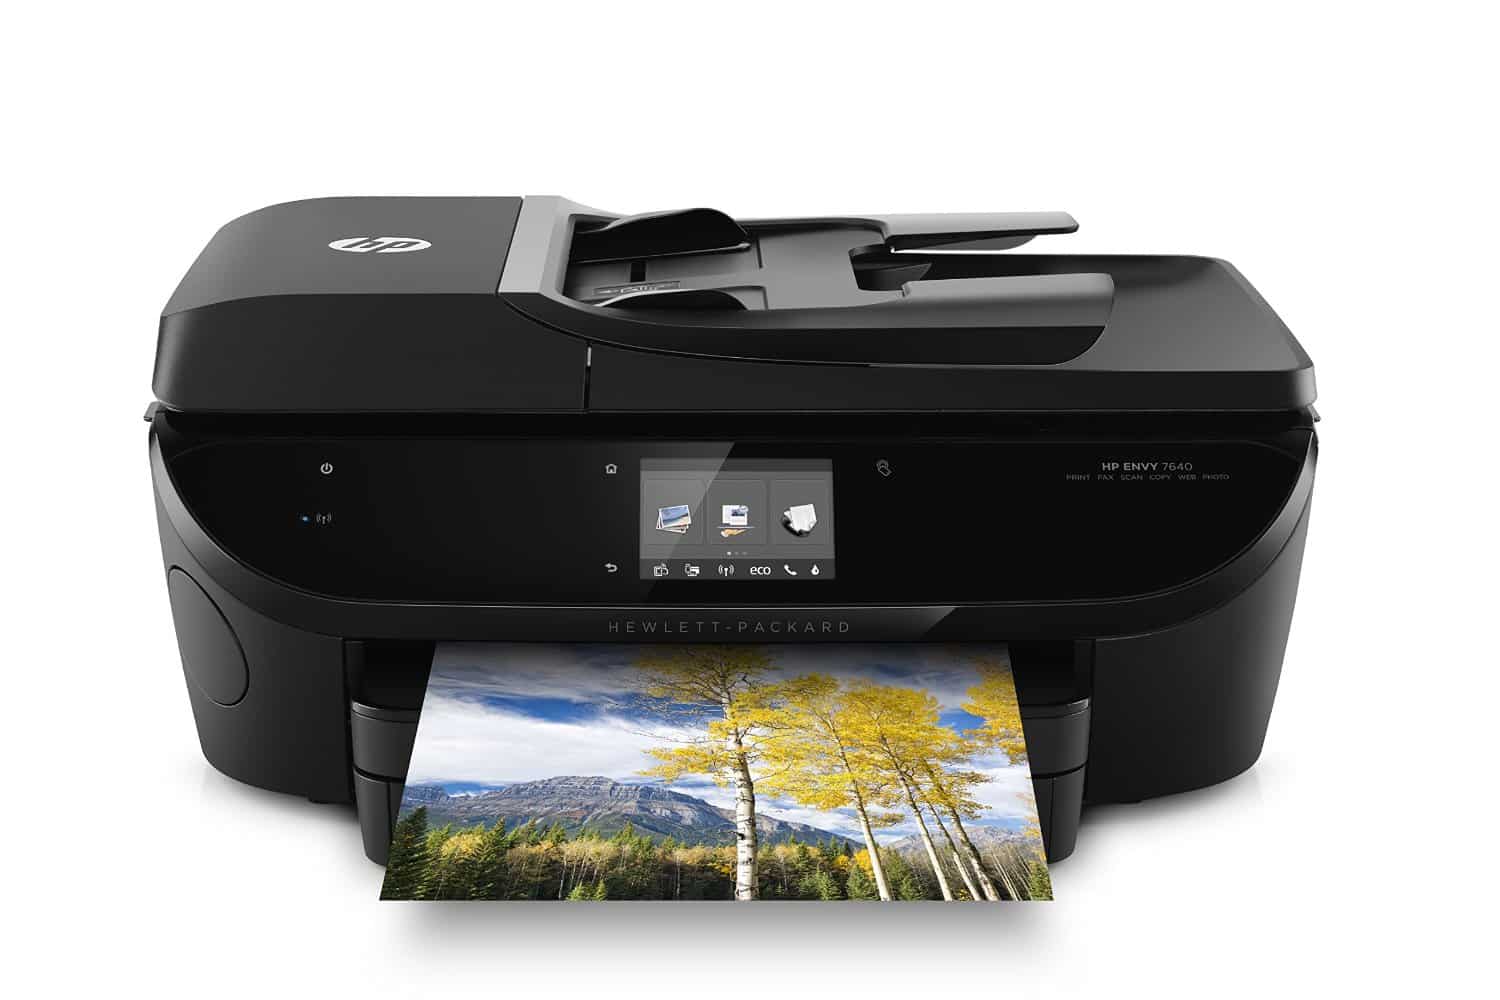 10 Best AllInOne Printers for Home Use in (2020) Buyer's Guide